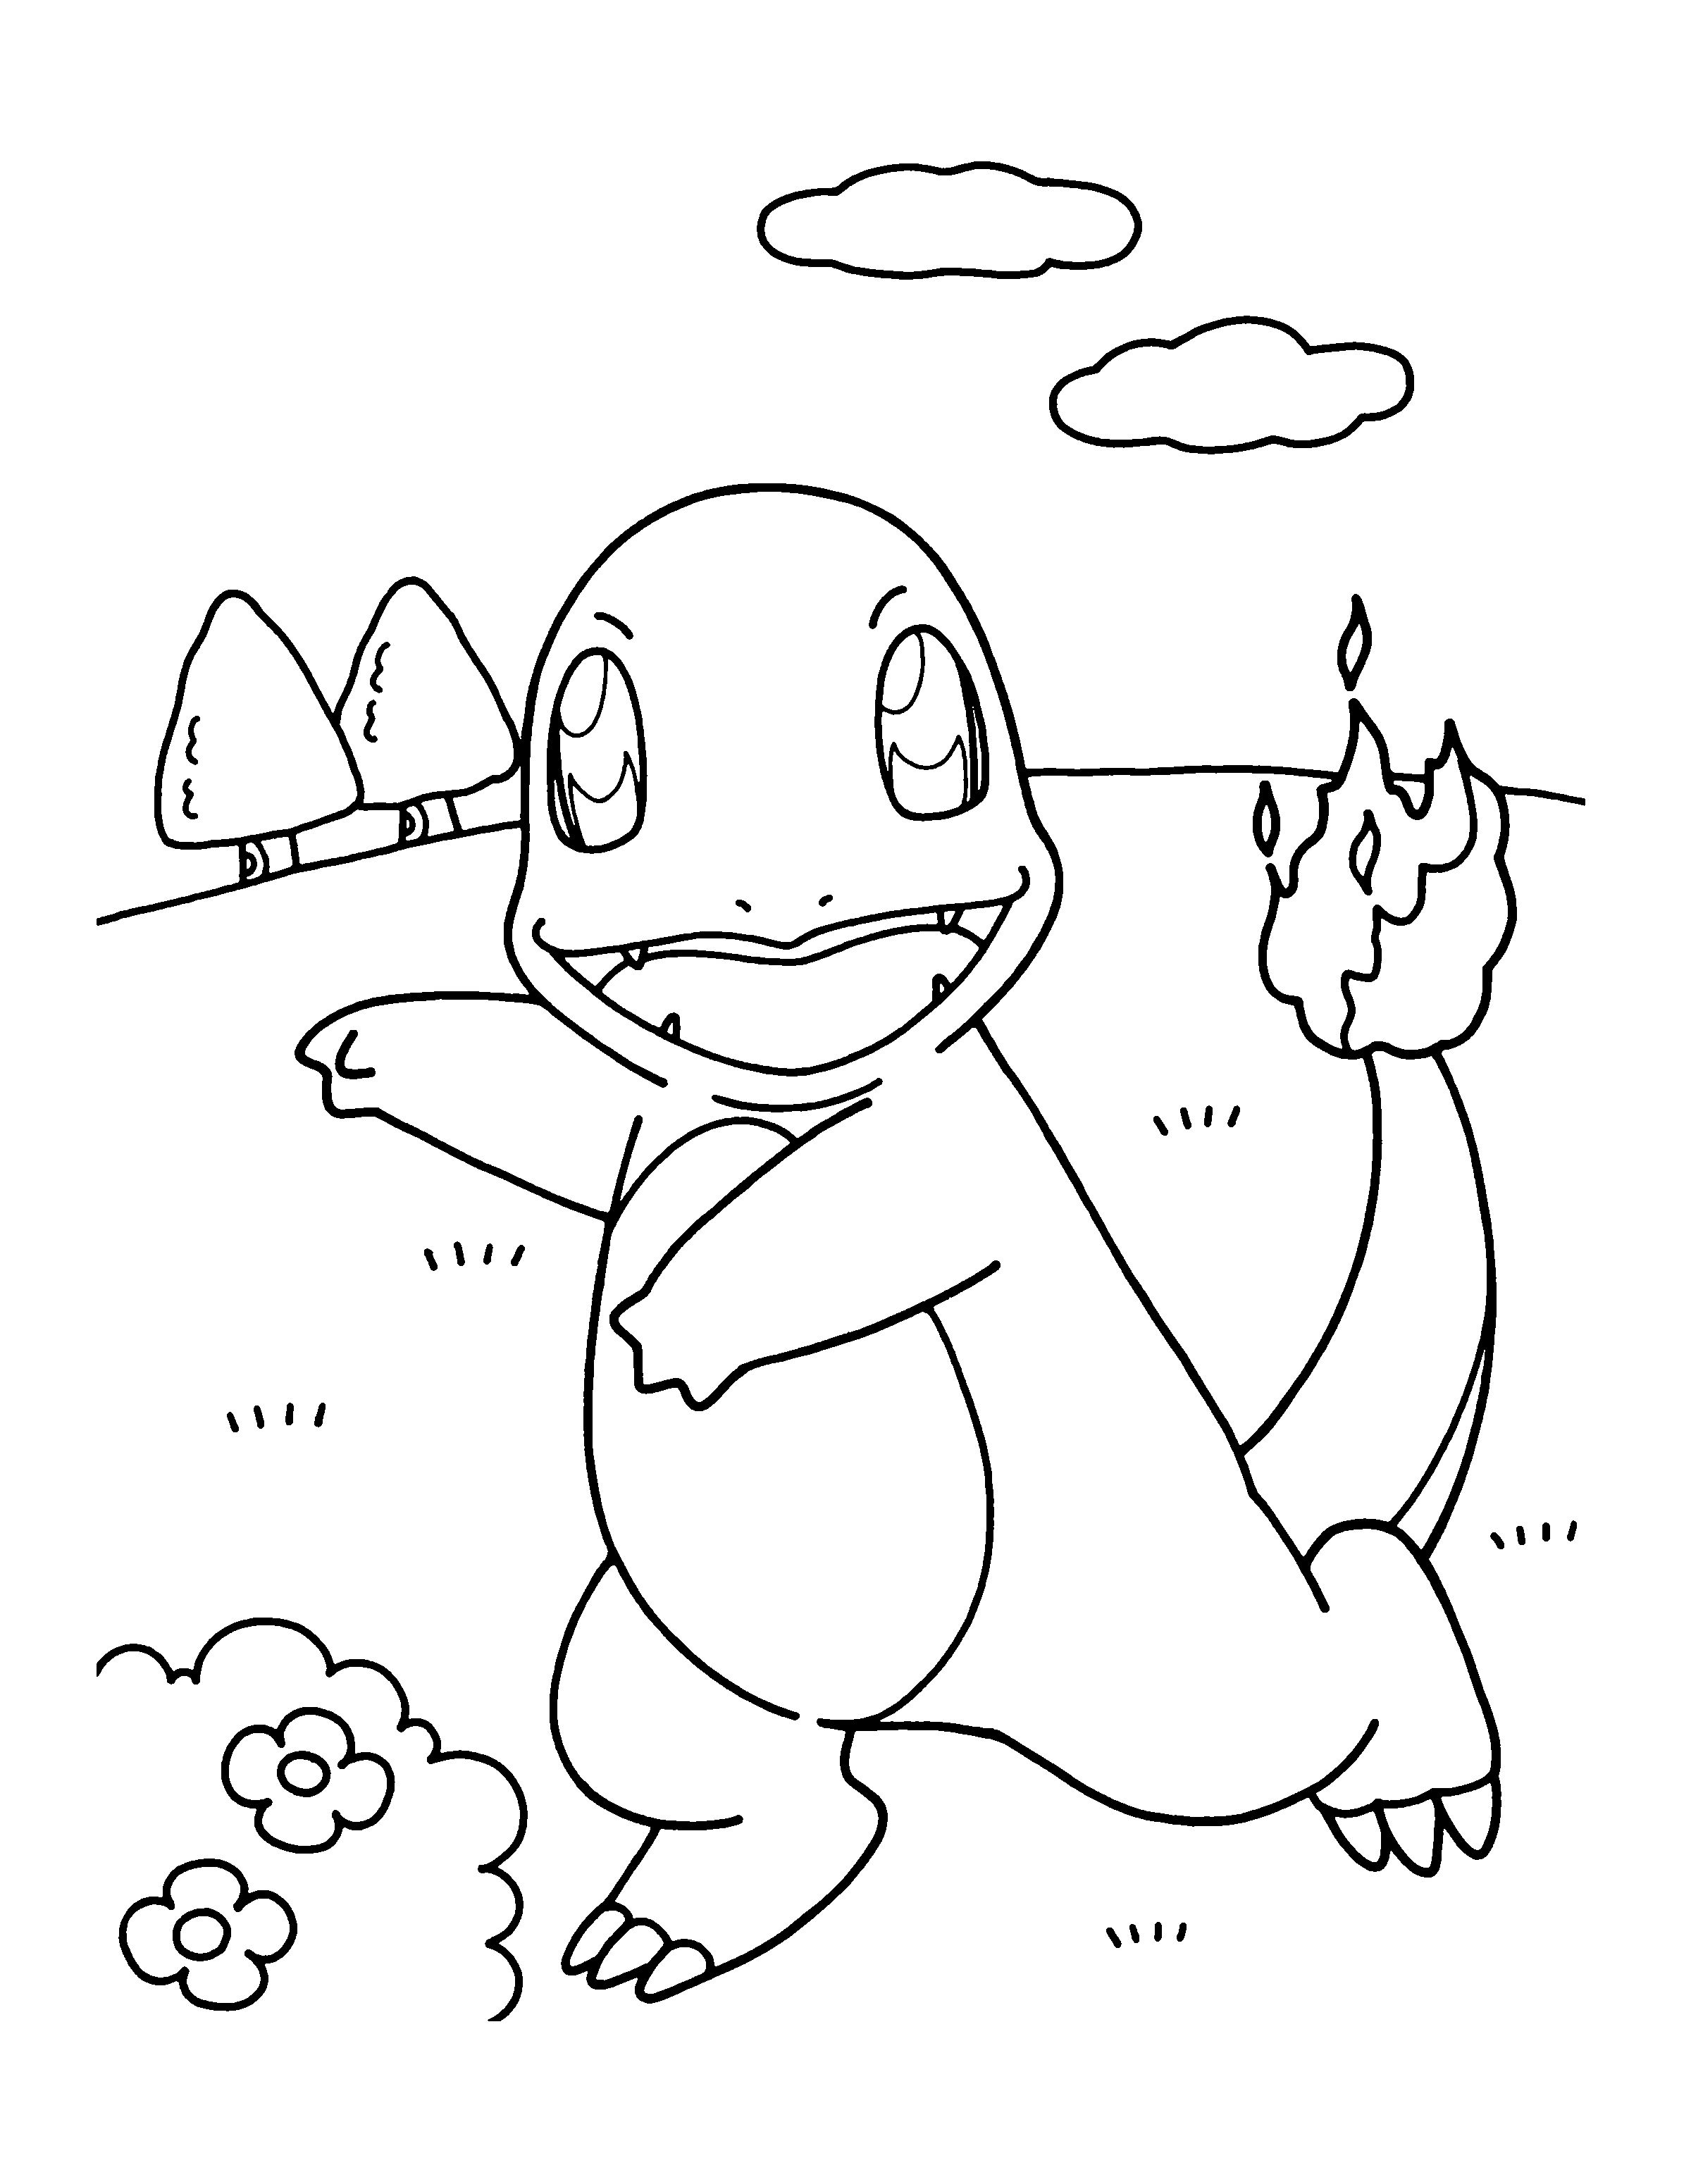 pokemon printable colouring pages all pokemon coloring pages download and print for free pages printable pokemon colouring 